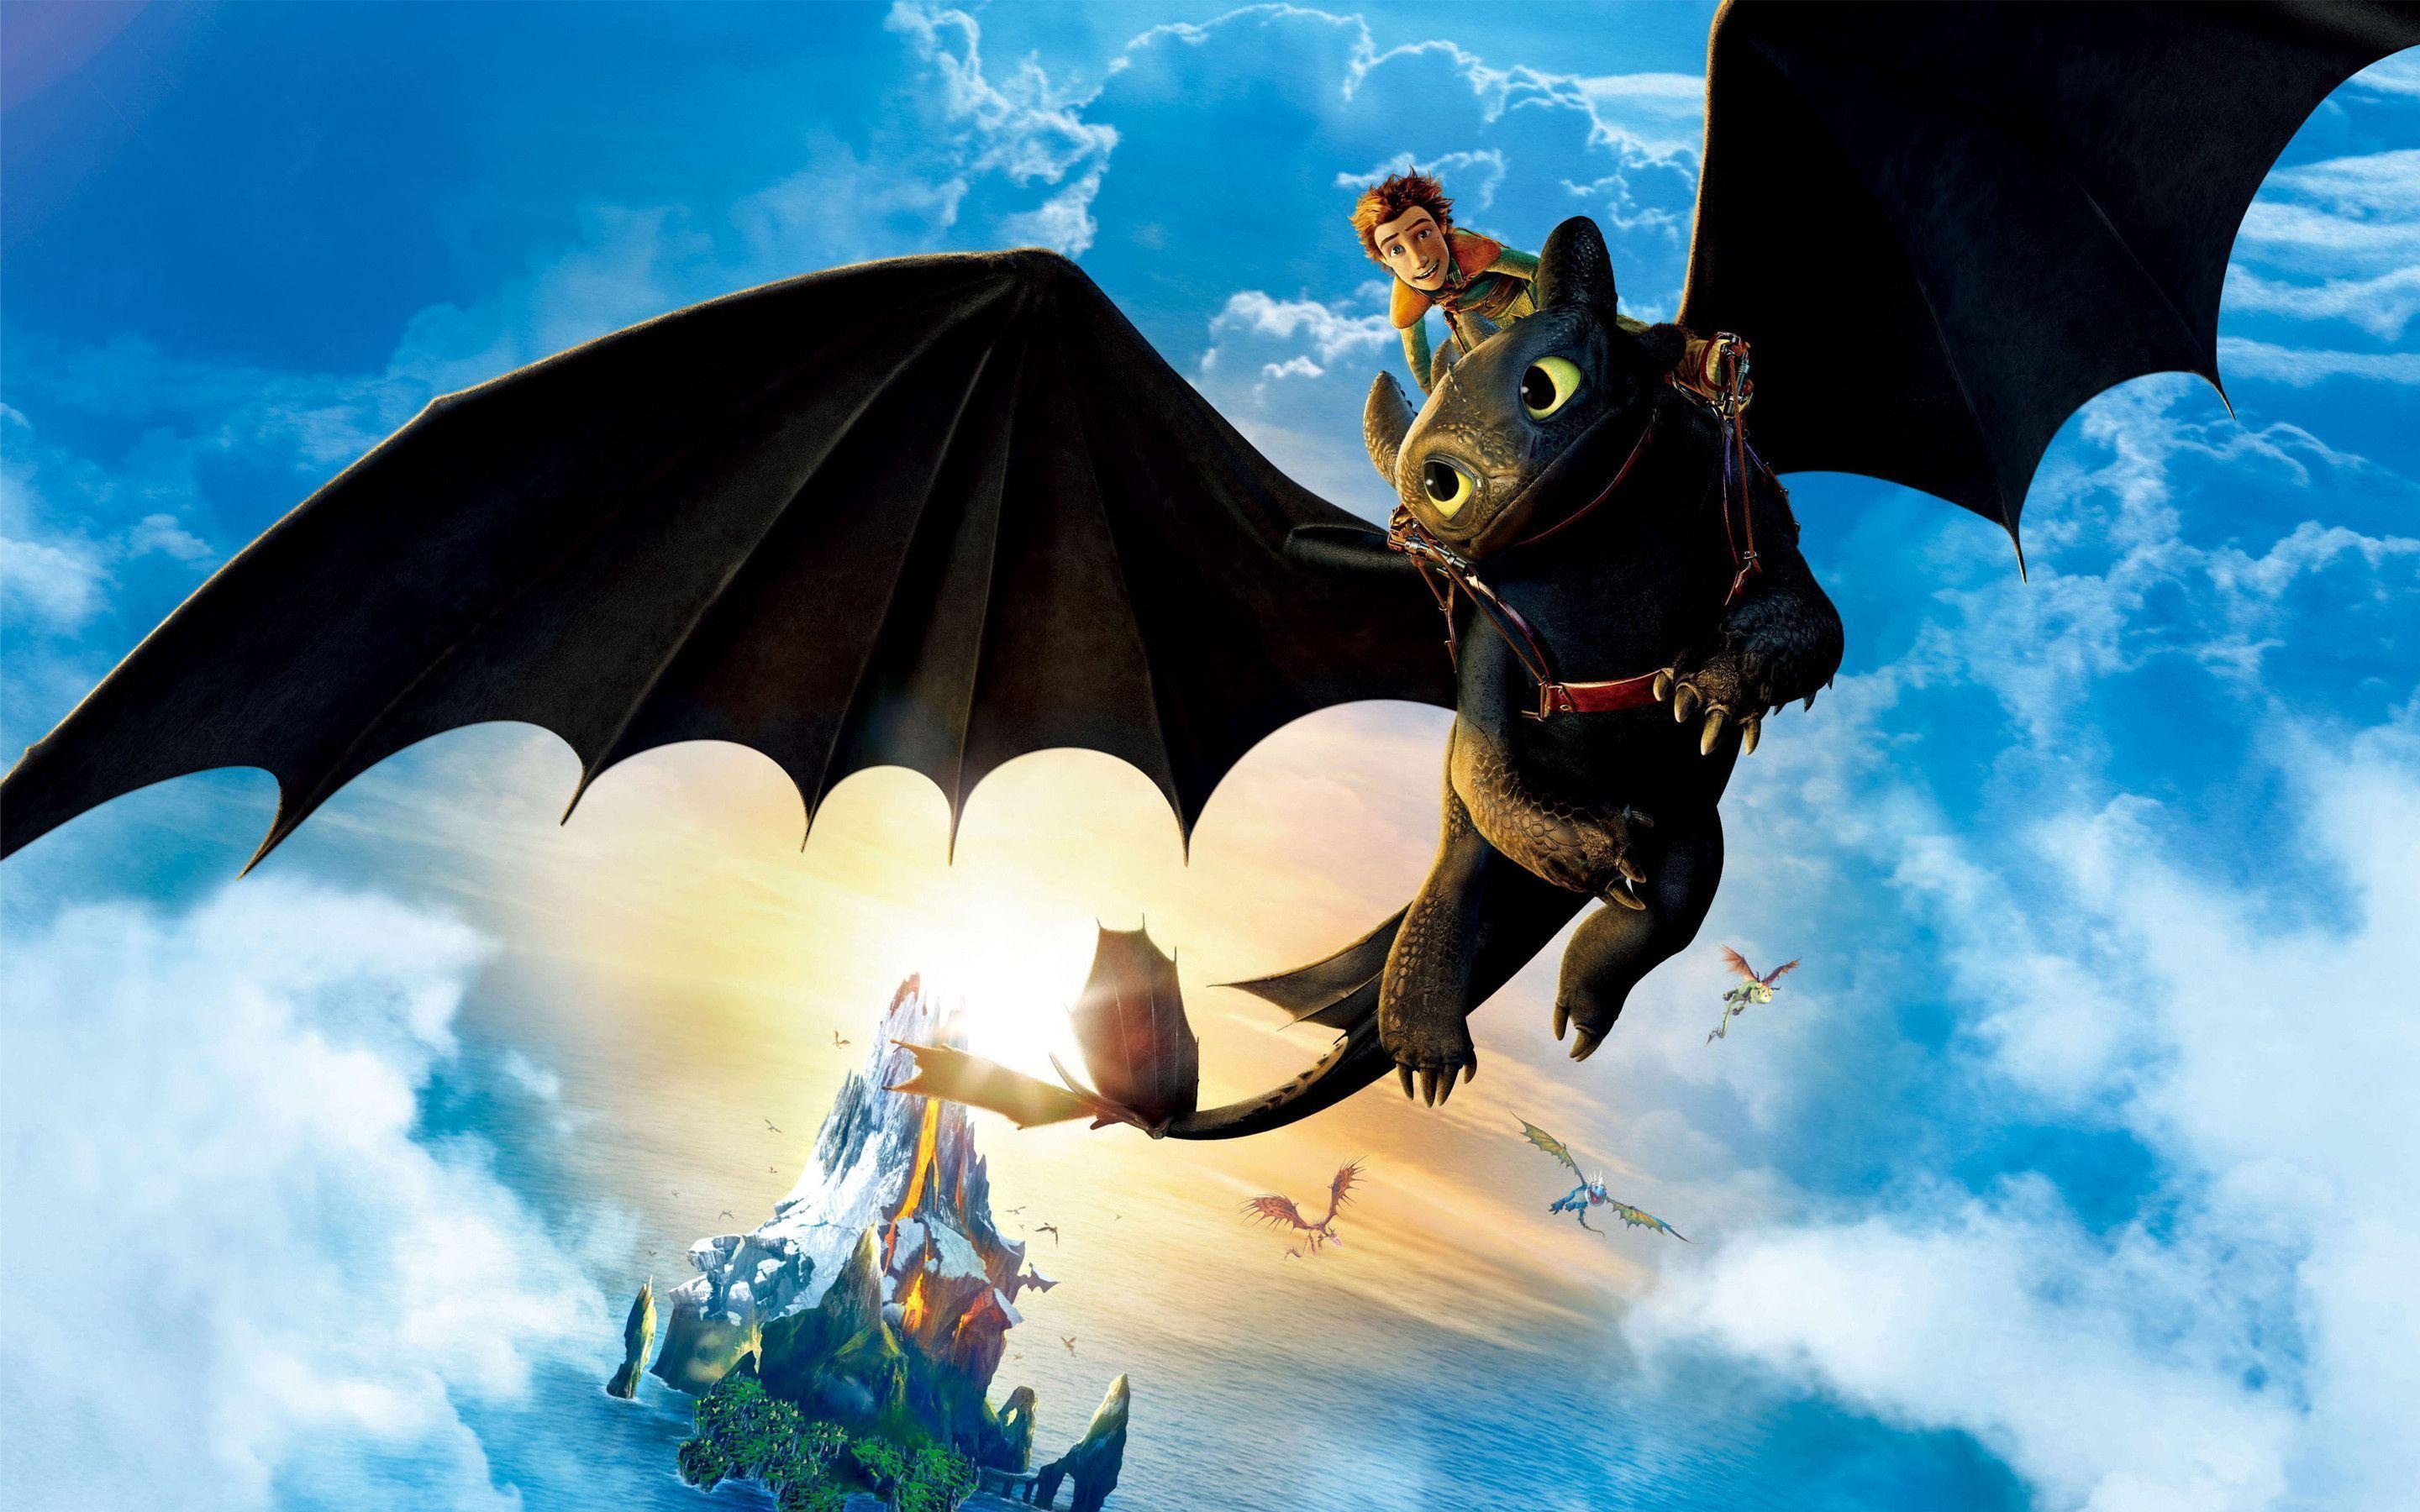 Hiccup and Toothless Exclusive HD Wallpaper #